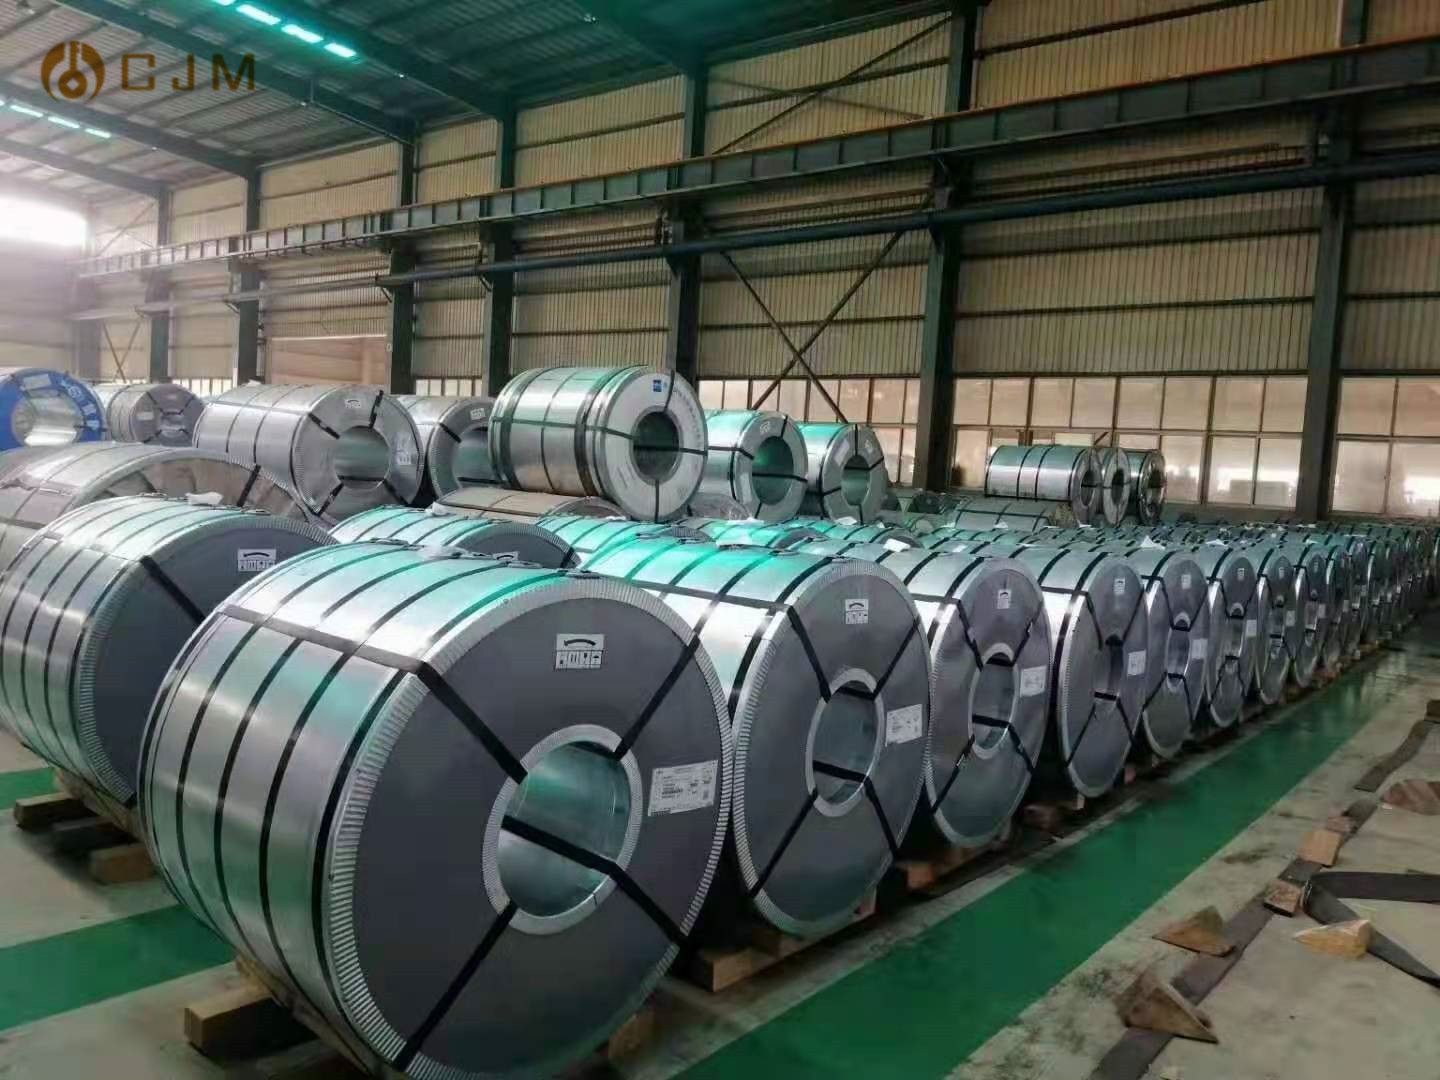 Type 420 Brushed Waterproof Cold Rolled Stainless Steel Coil